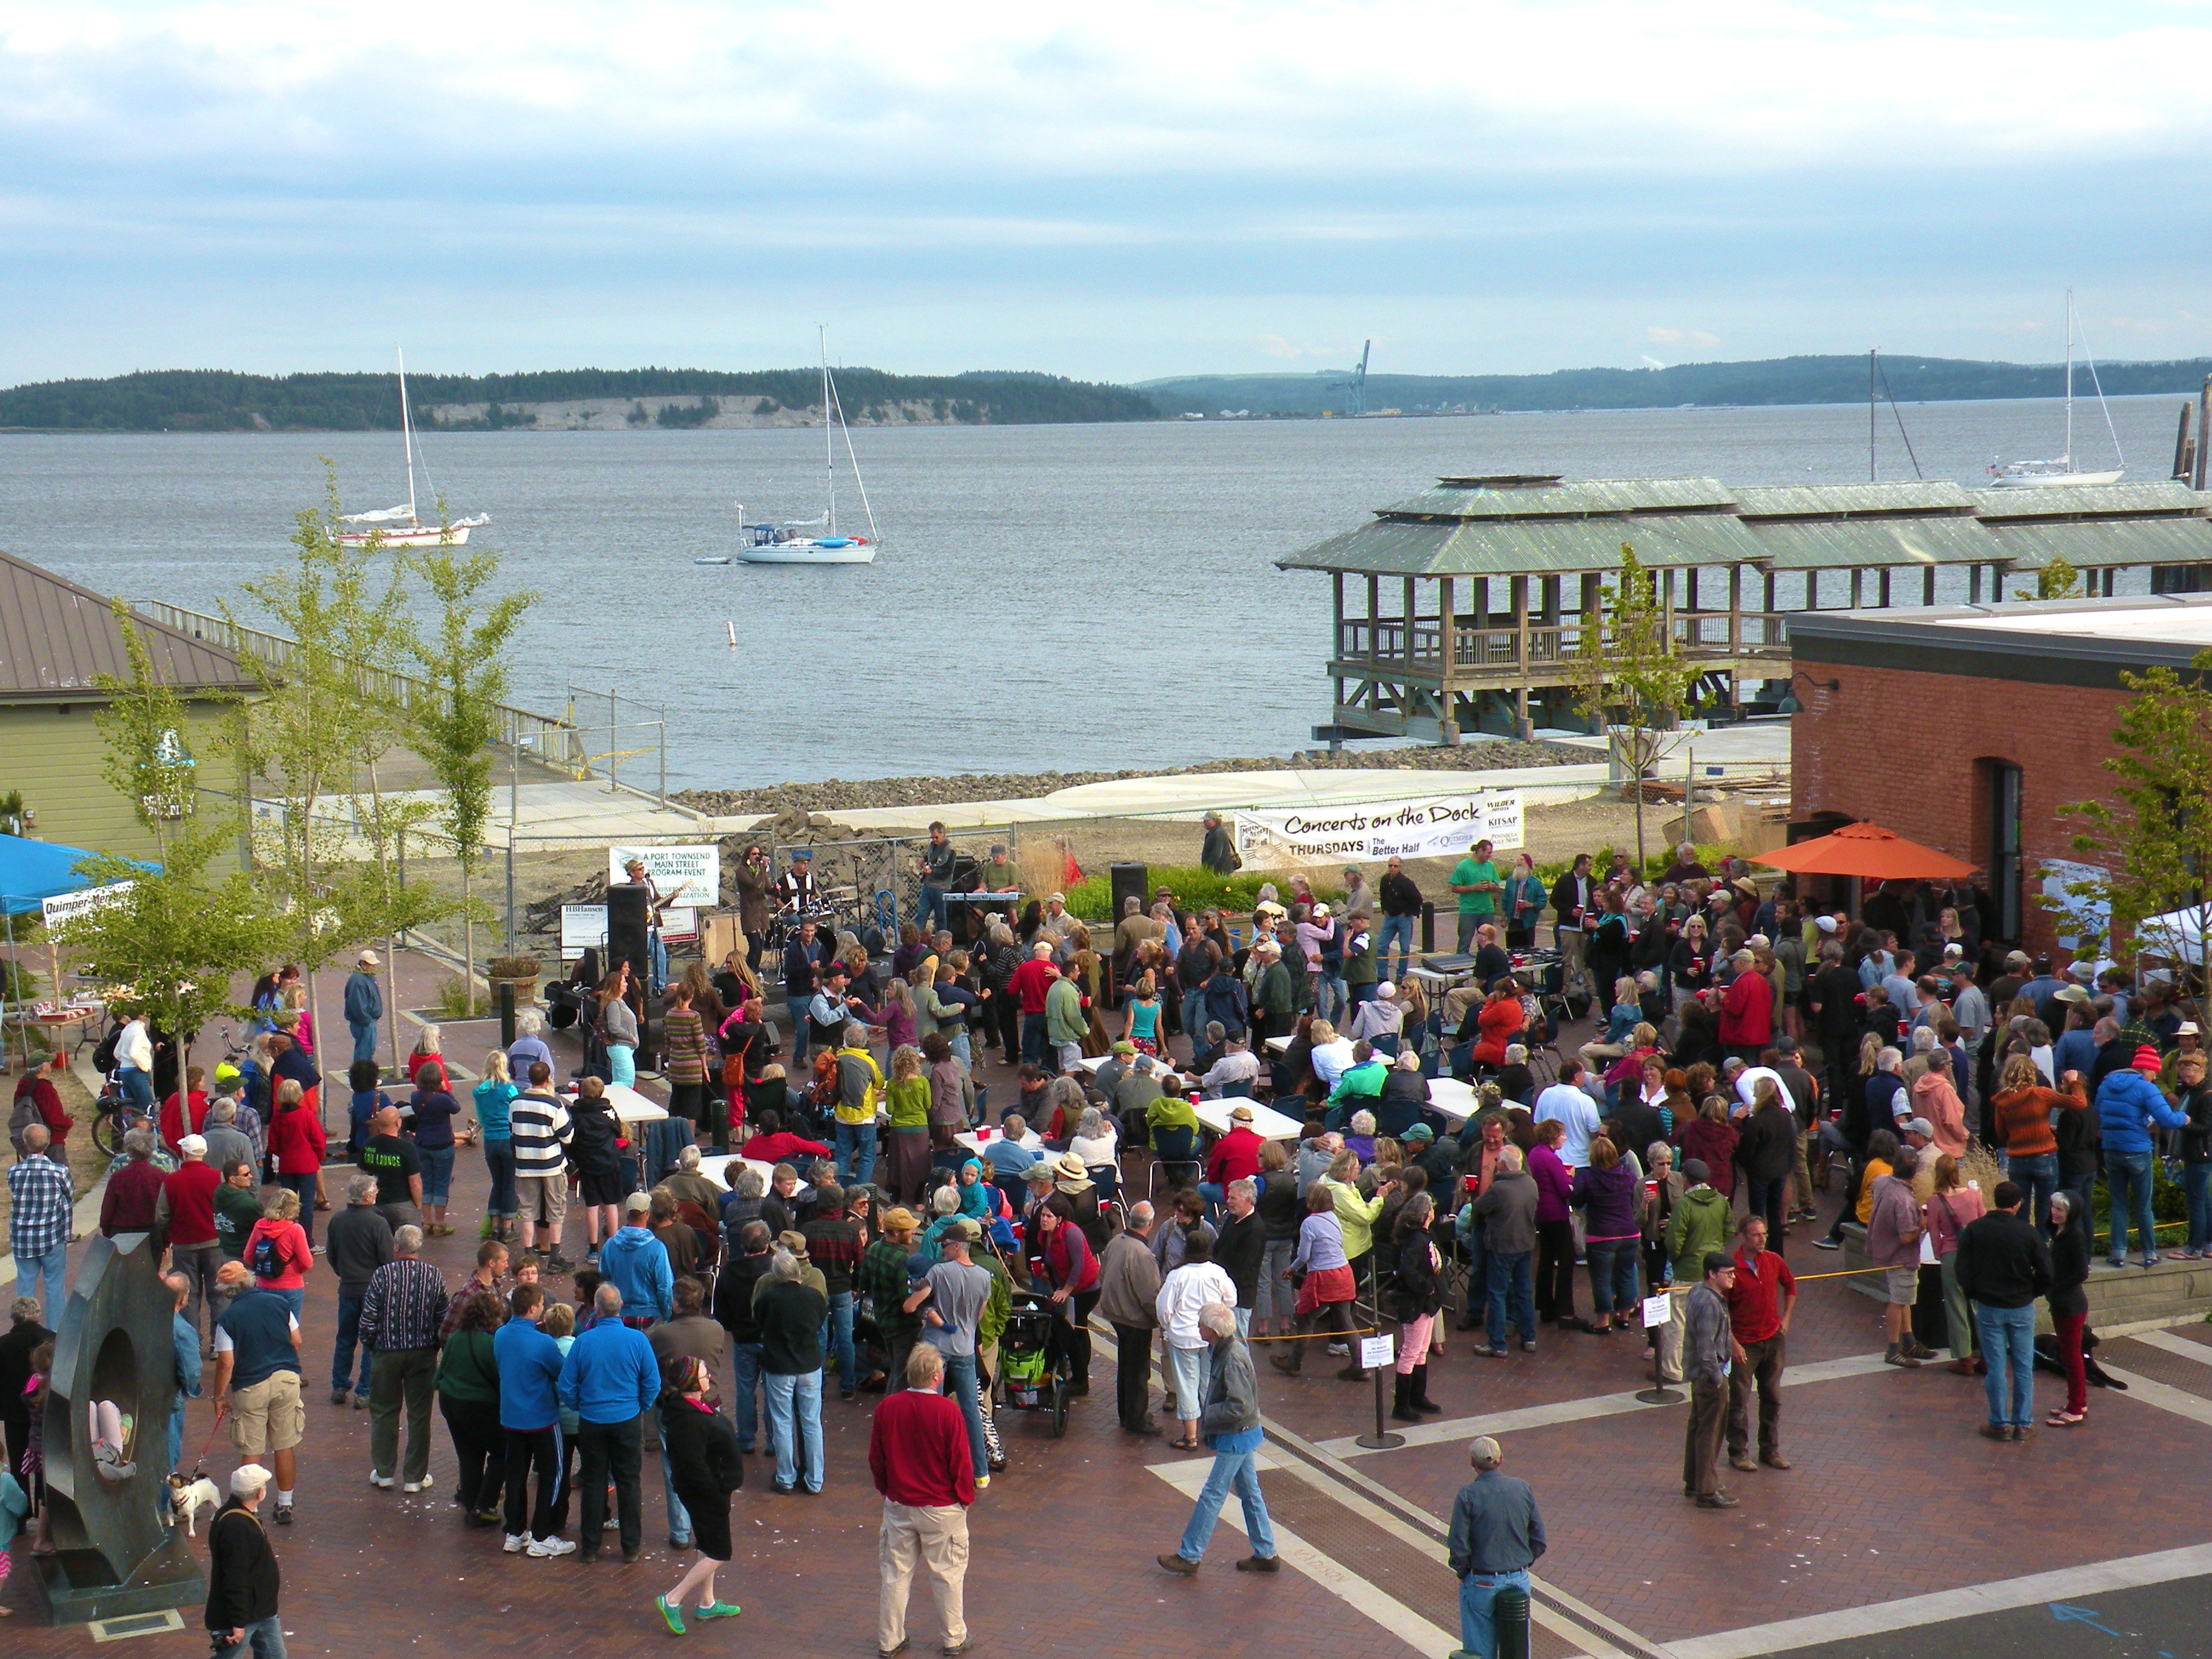 Concerts on the Dock